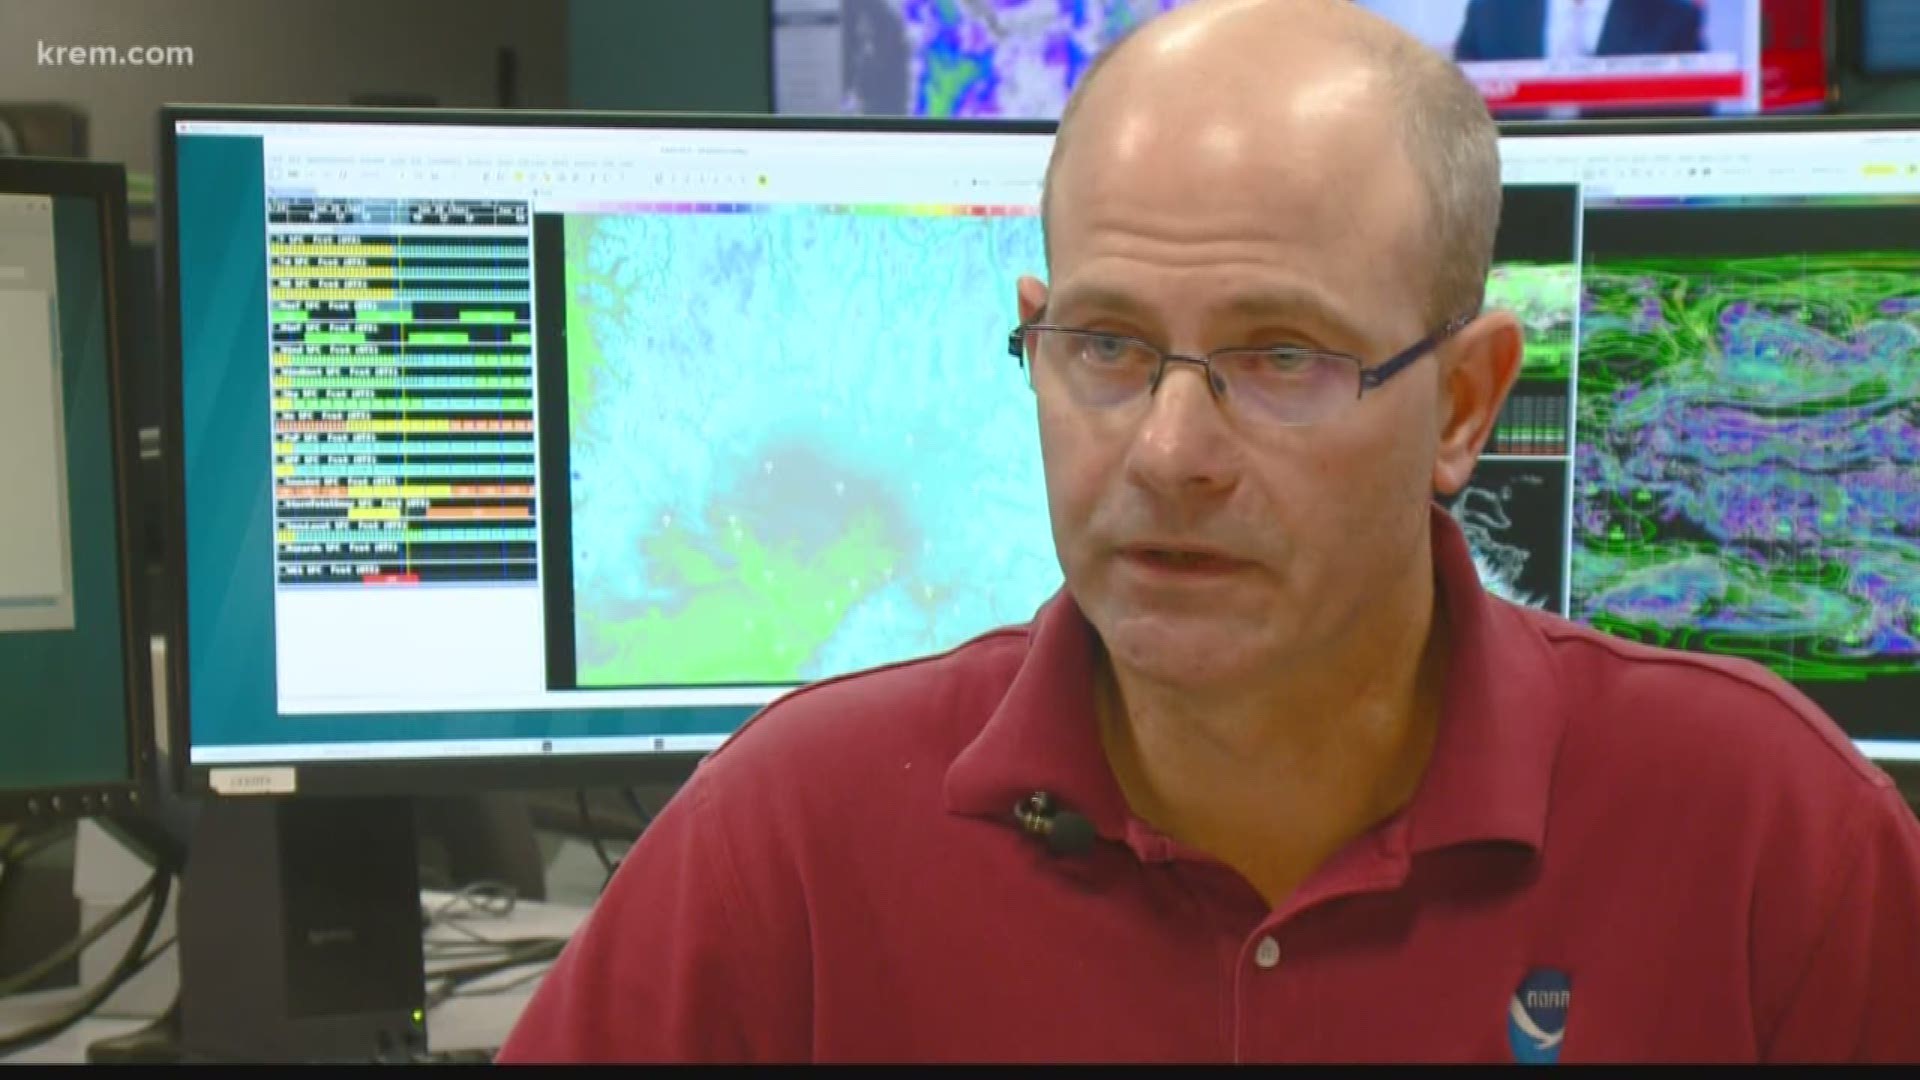 A Spokane meteorologist with the National Weather Service is packing his bags for Australia. He'll be serving as a forecaster to help with the country's wildfires.